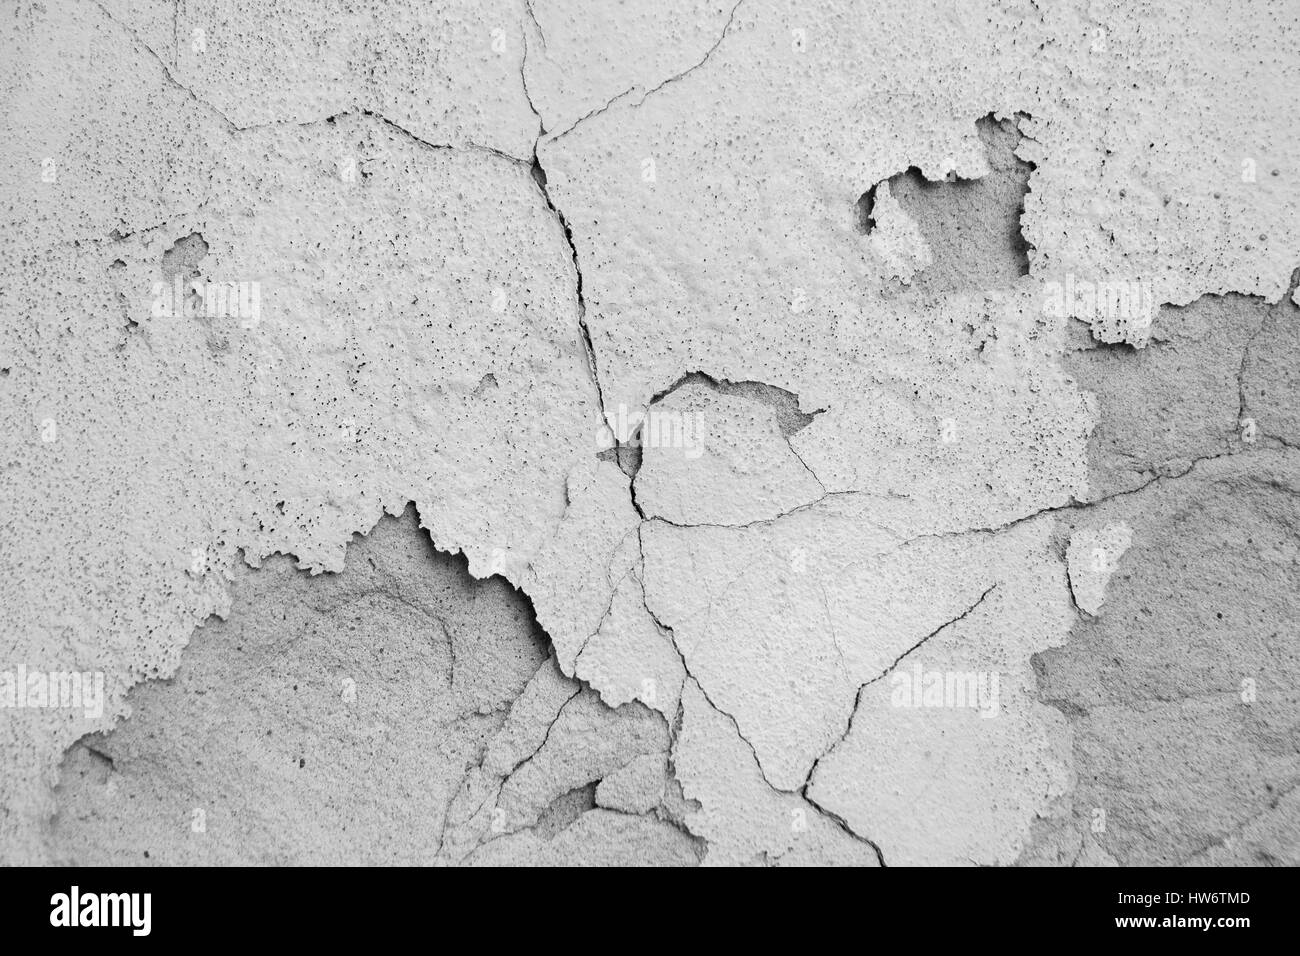 cracked paint on building facade Stock Photo